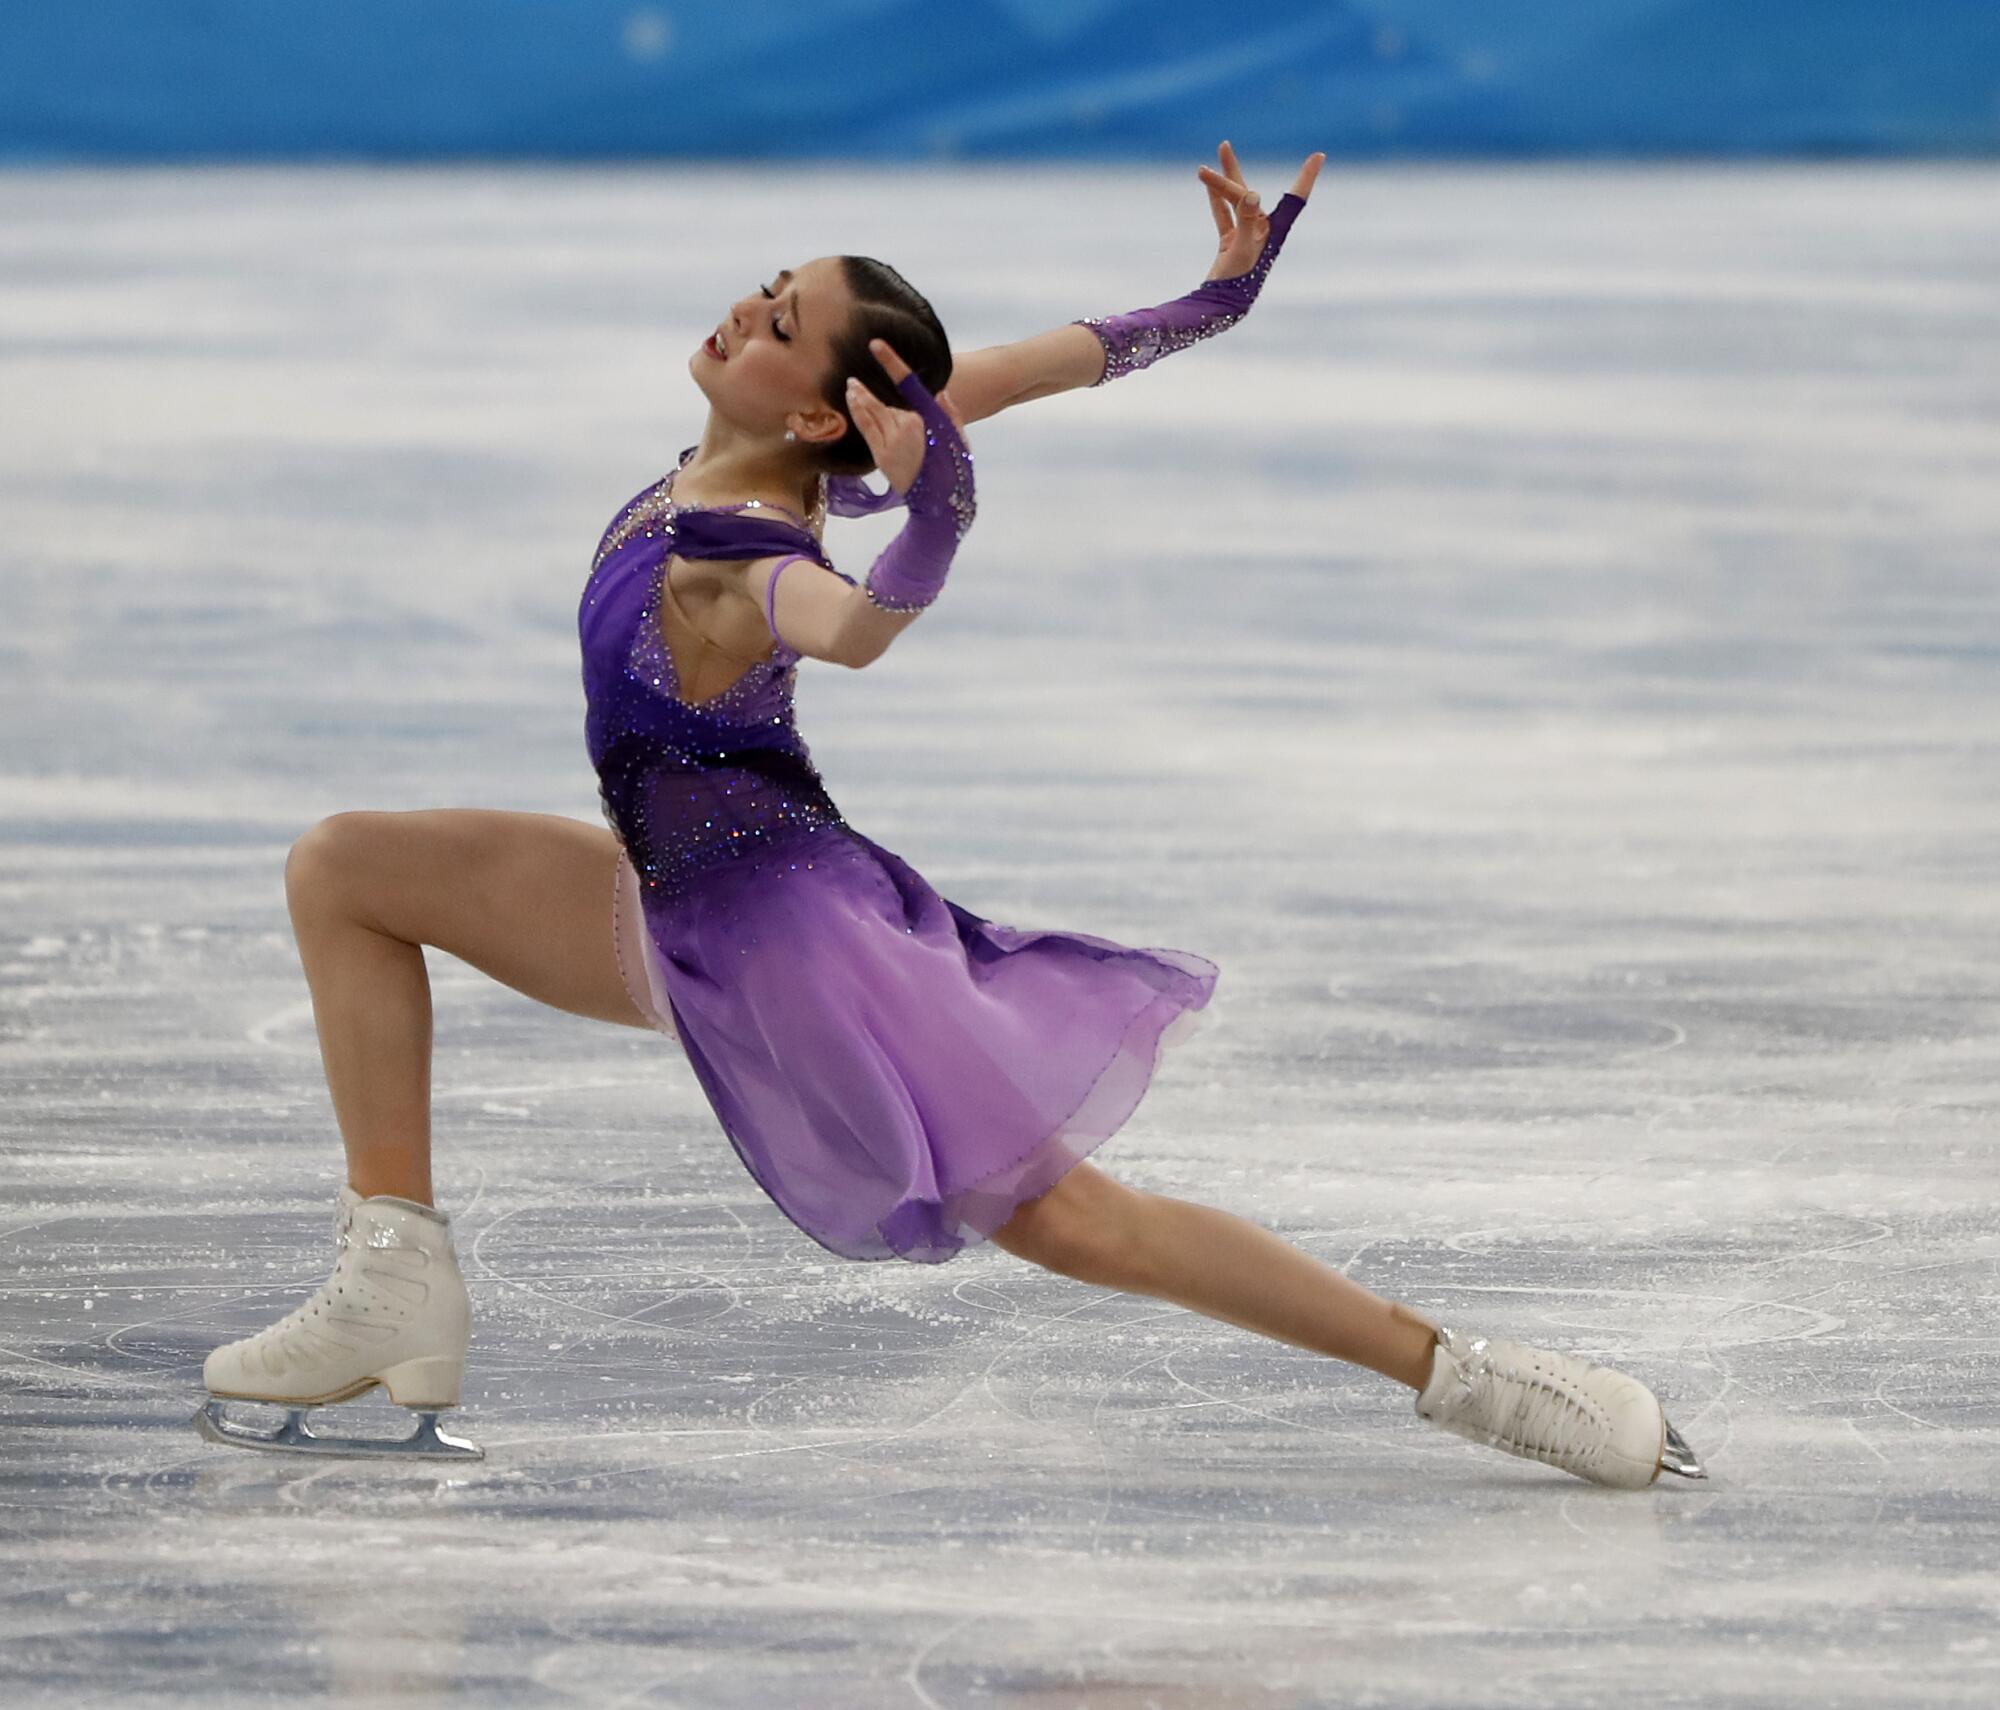 Russian figure skater Kamila Valieva competes in the women's short program Tuesday at the Winter Olympics.